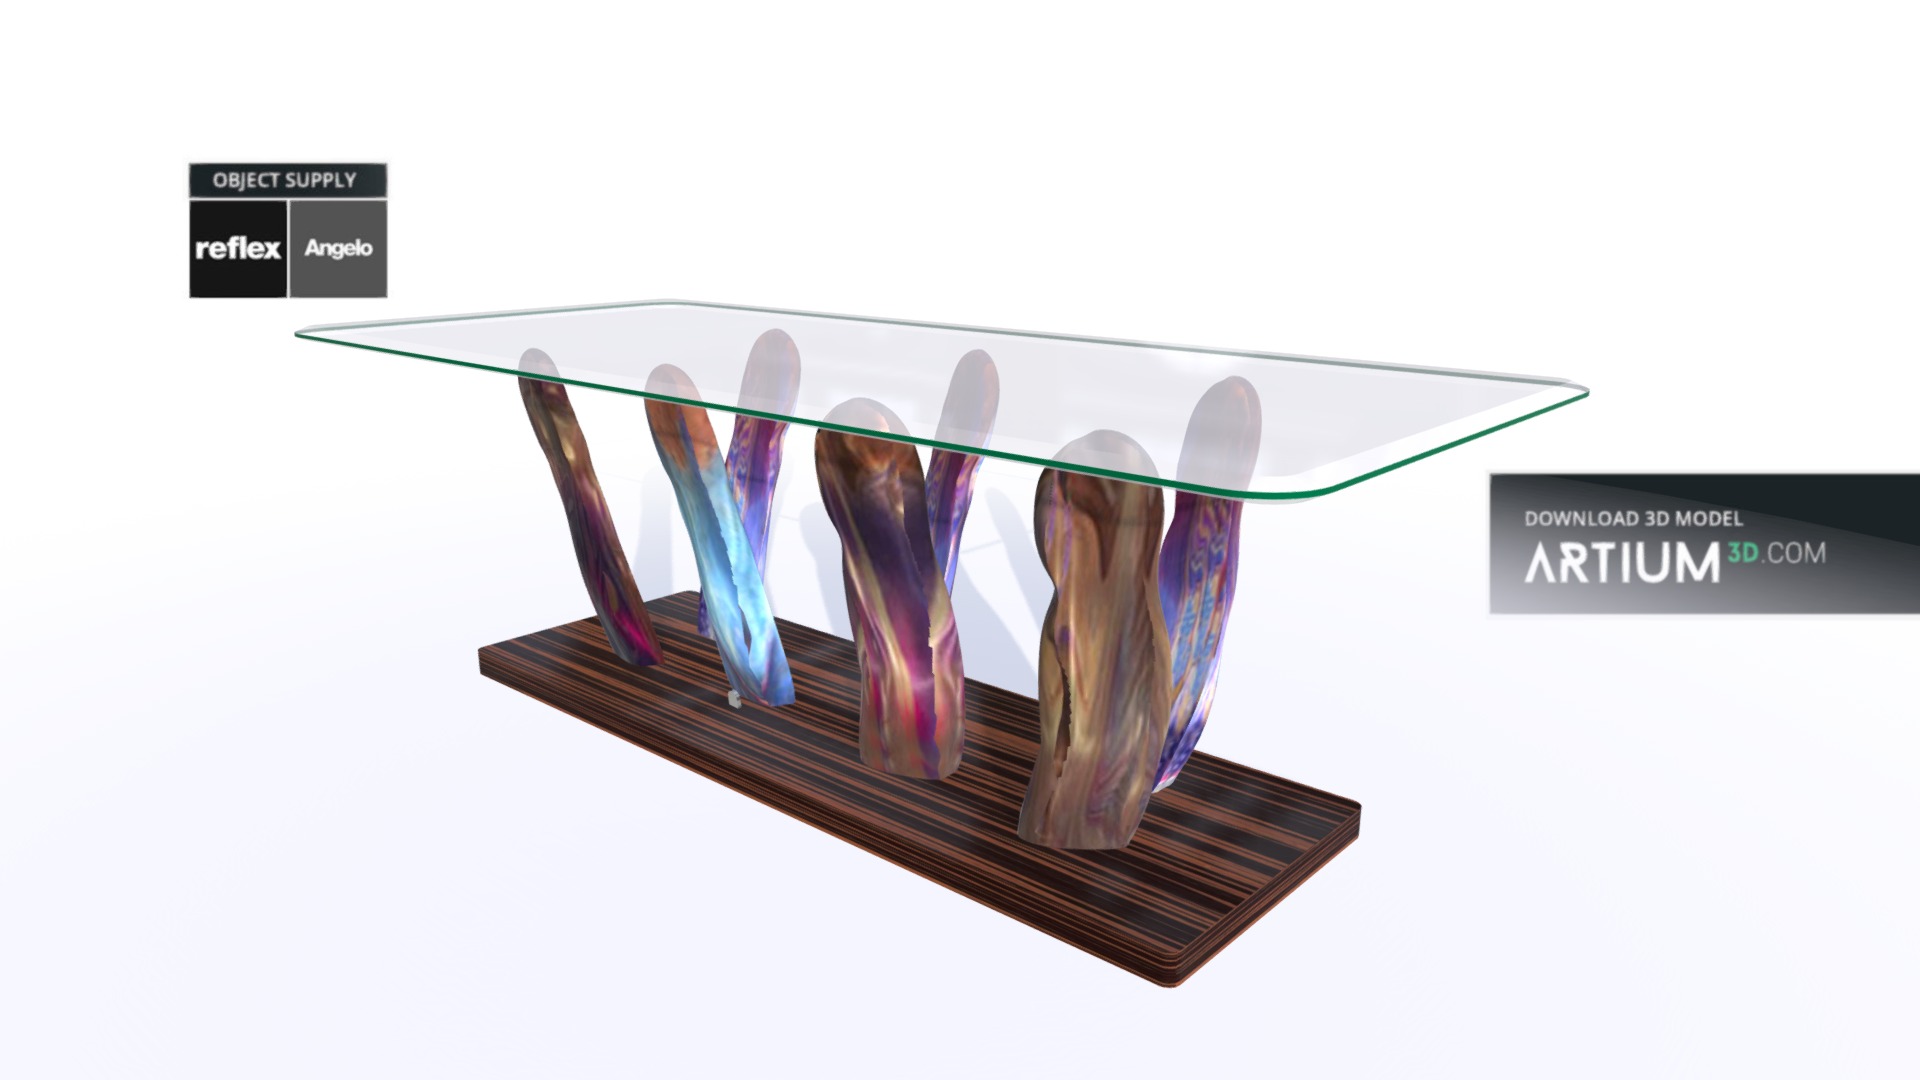 3D model Diner table Sassi 72 from Reflex Angelo - This is a 3D model of the Diner table Sassi 72 from Reflex Angelo. The 3D model is about website.